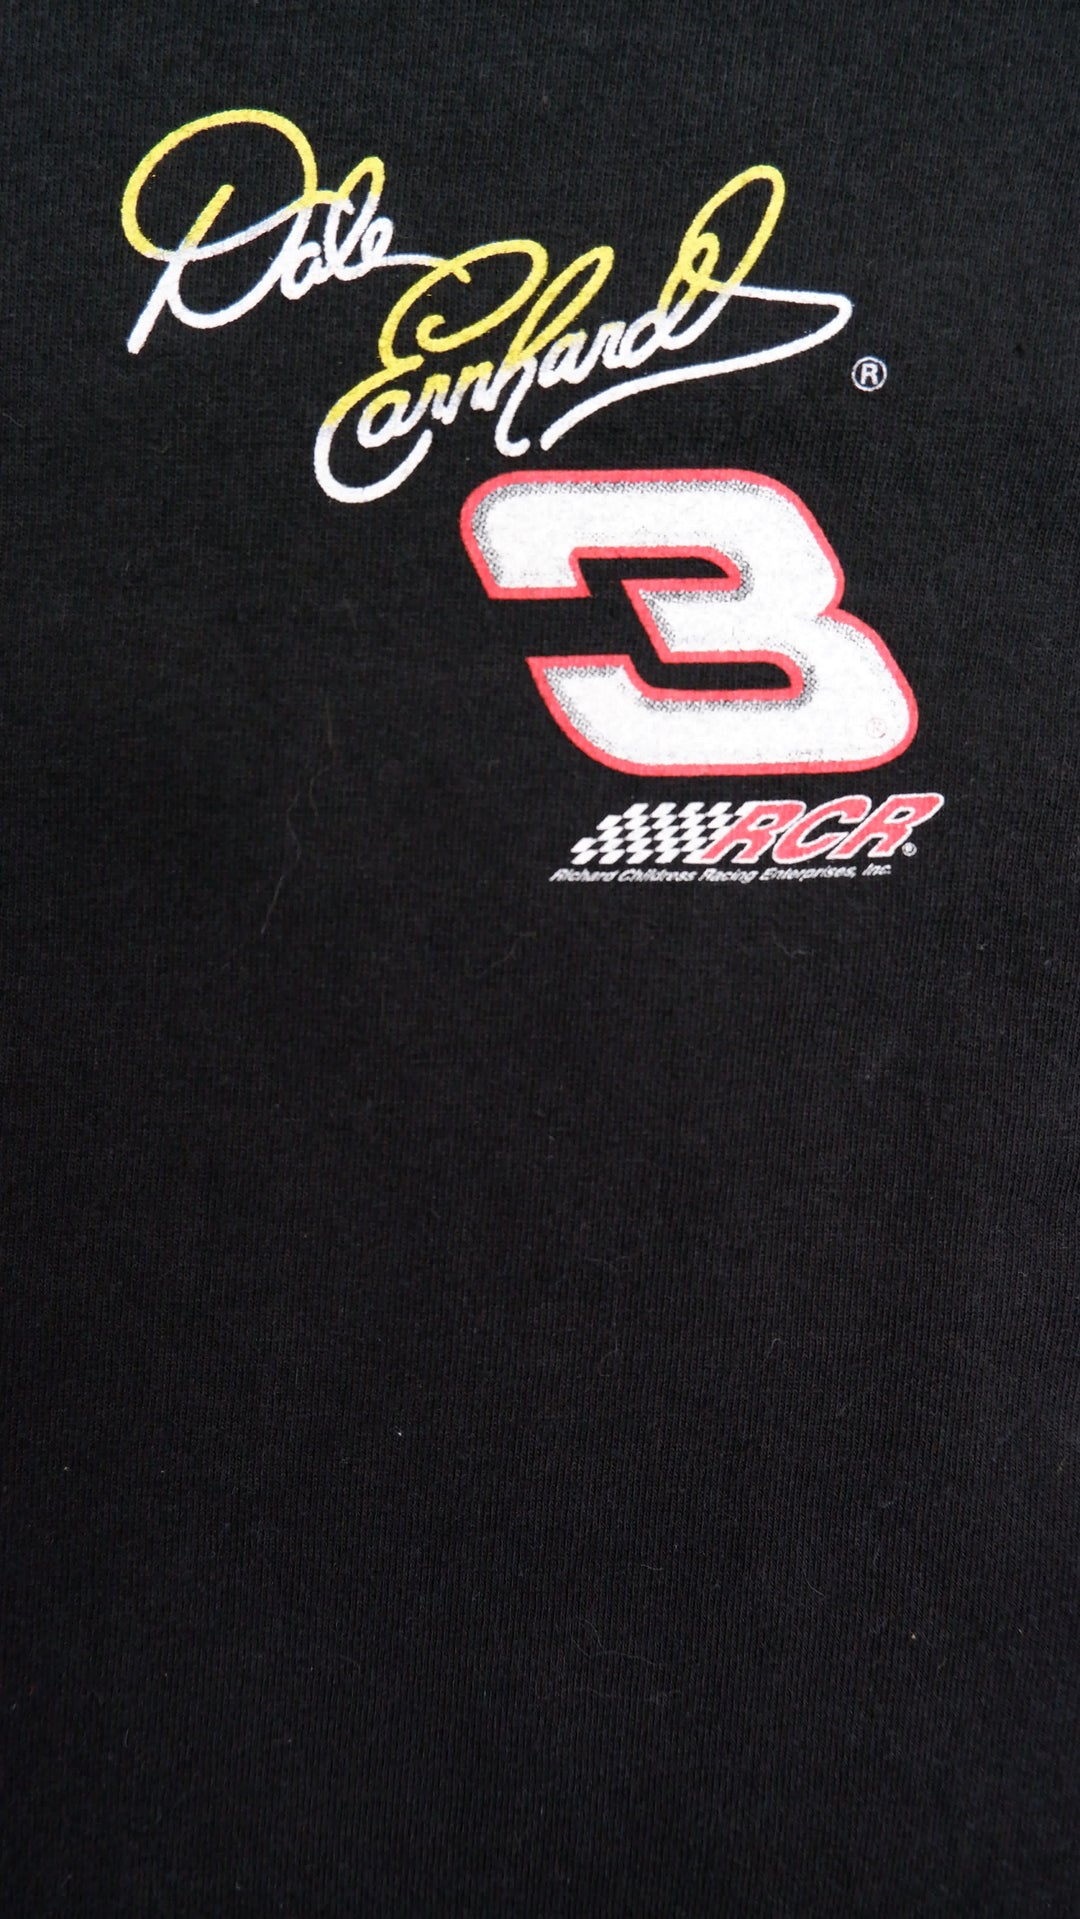 Vintage Competitors View Dale Earnhardt # 3 Intimidated Nascar Racing T-Shirt Made In USA